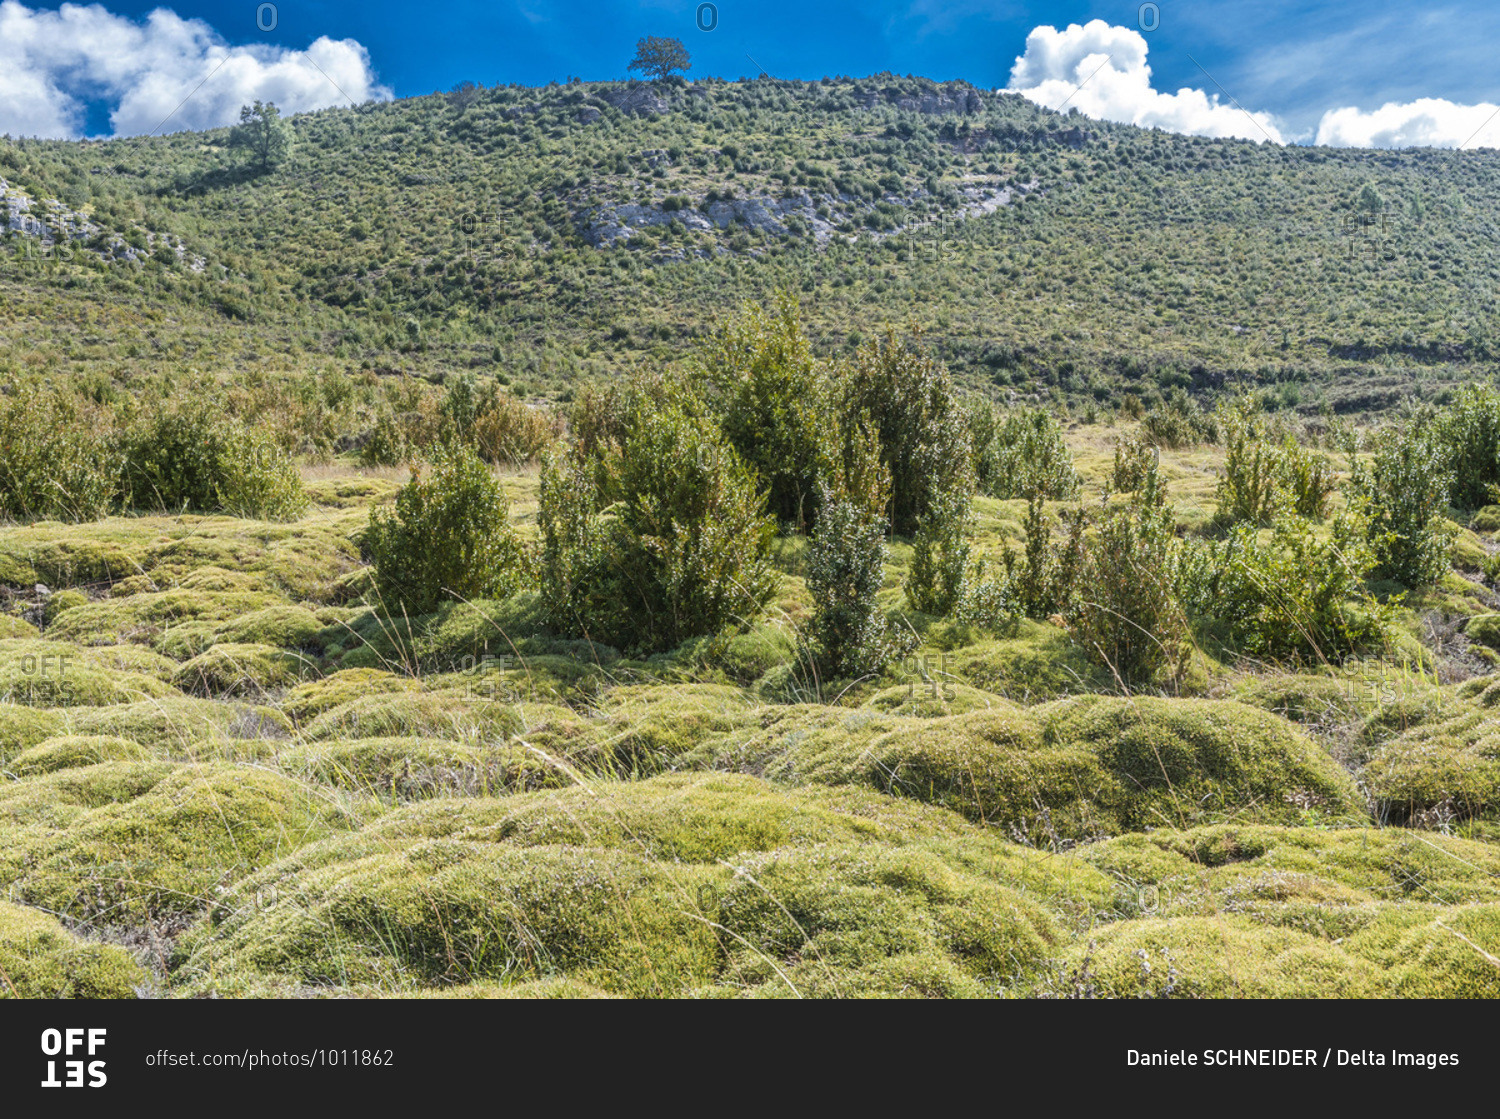 Spain, autonomous community of Aragon, Sierra y Canons de Guara natural park, landscape and plateau of the Mascun canyon, bushes of gorse and boxwood